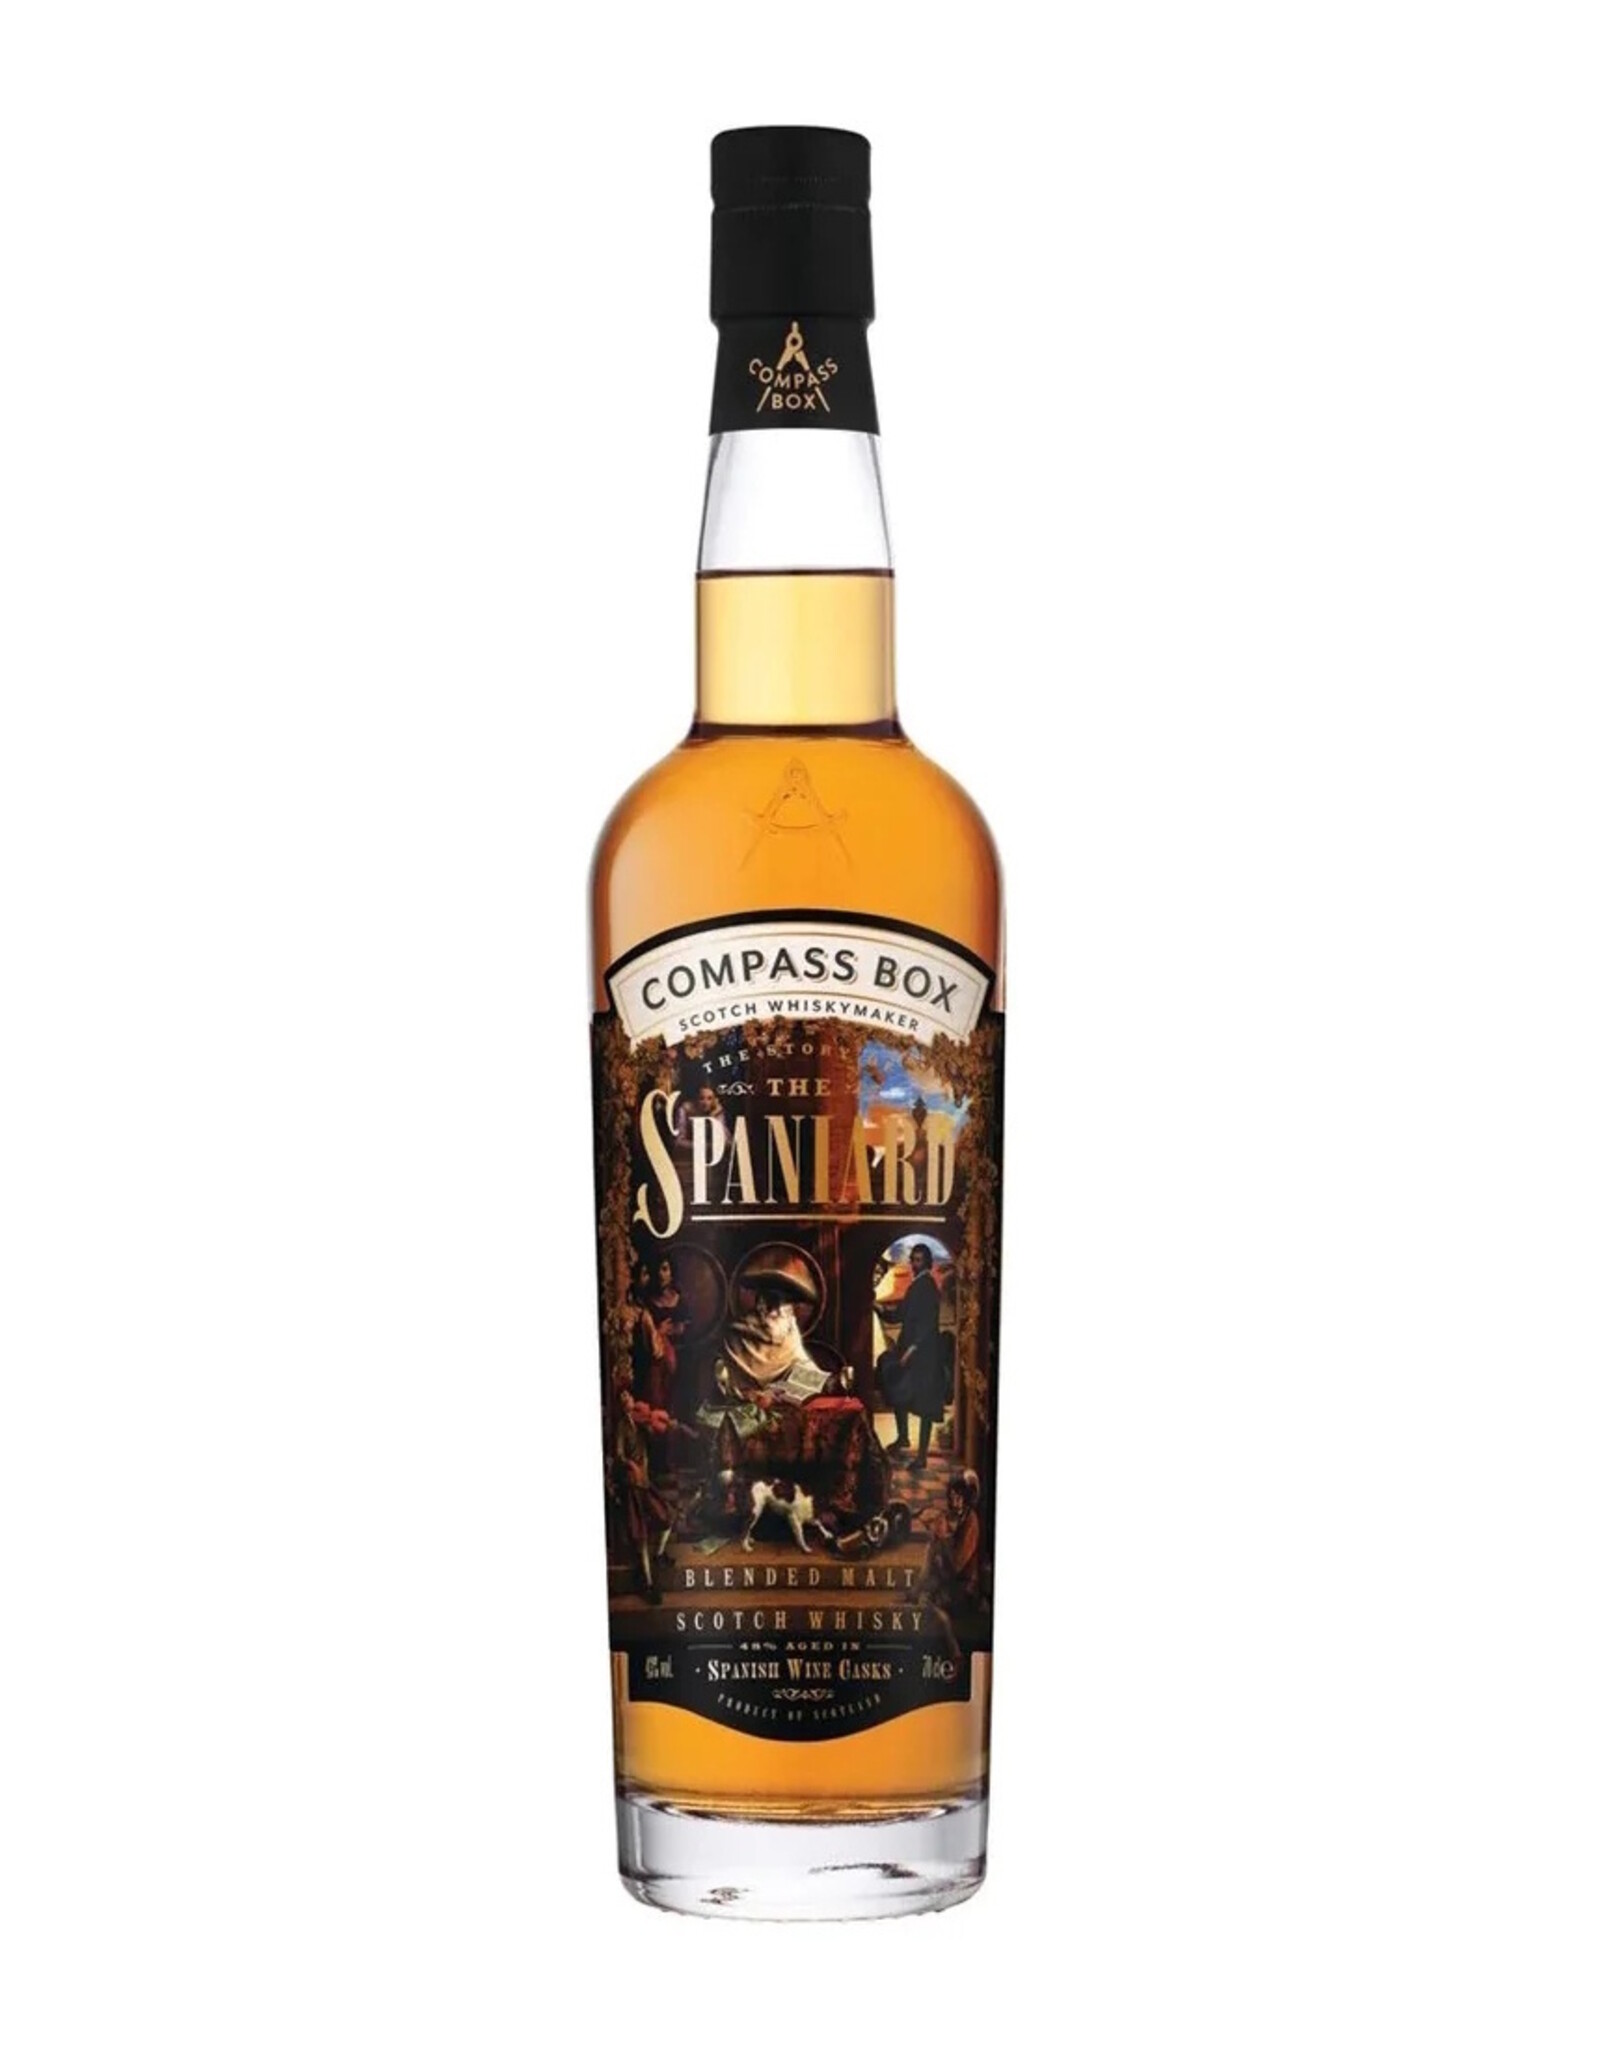 Compass Box Compass Box The Story of the Spaniard